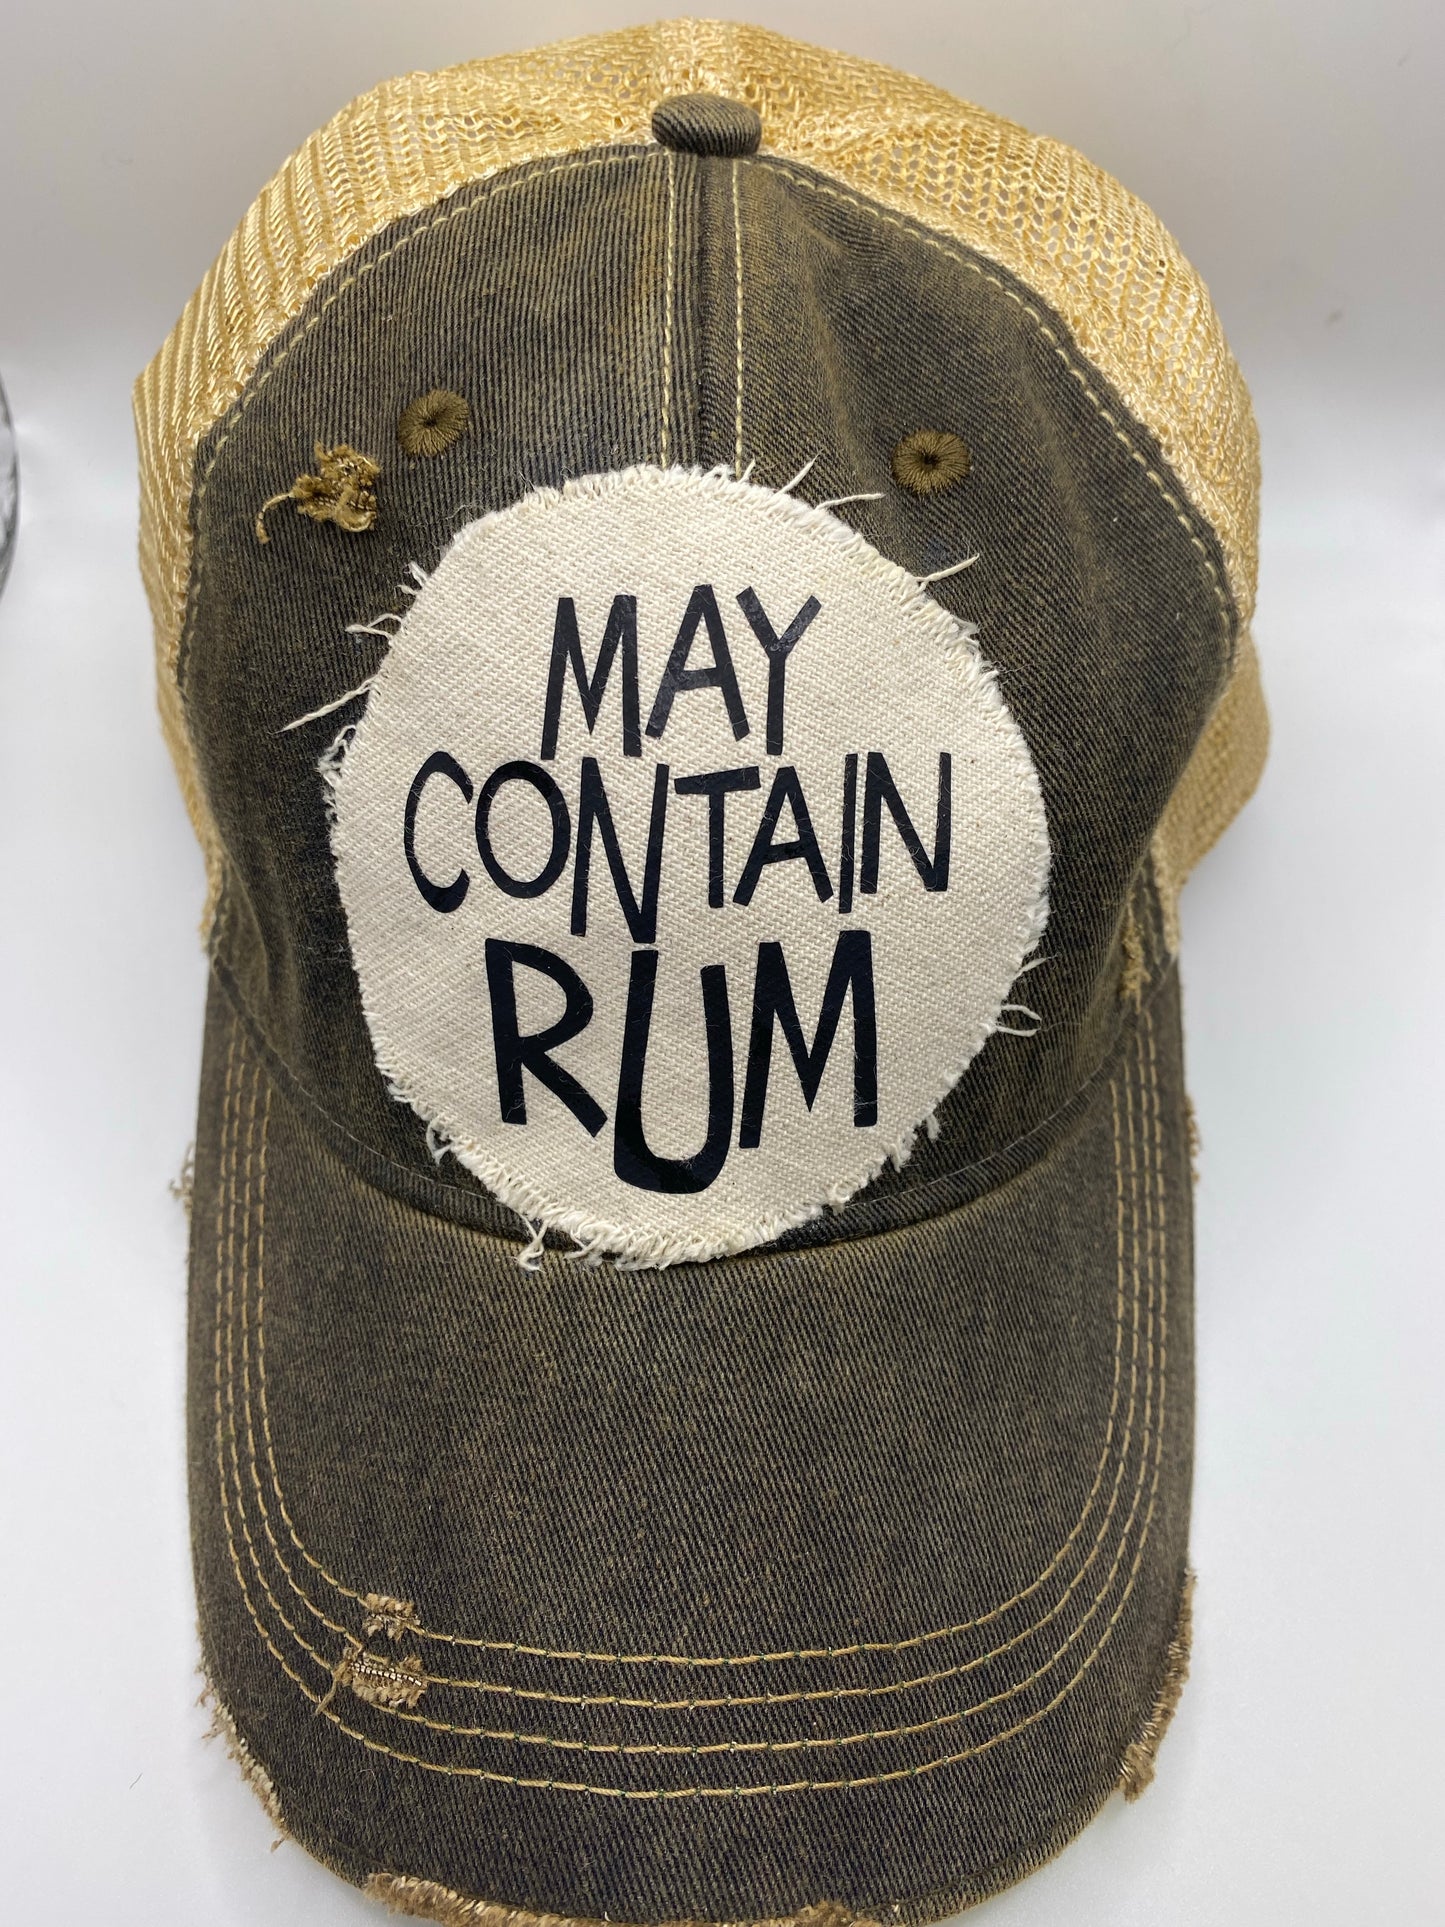 MAY CONTAIN RUM Trucker hat